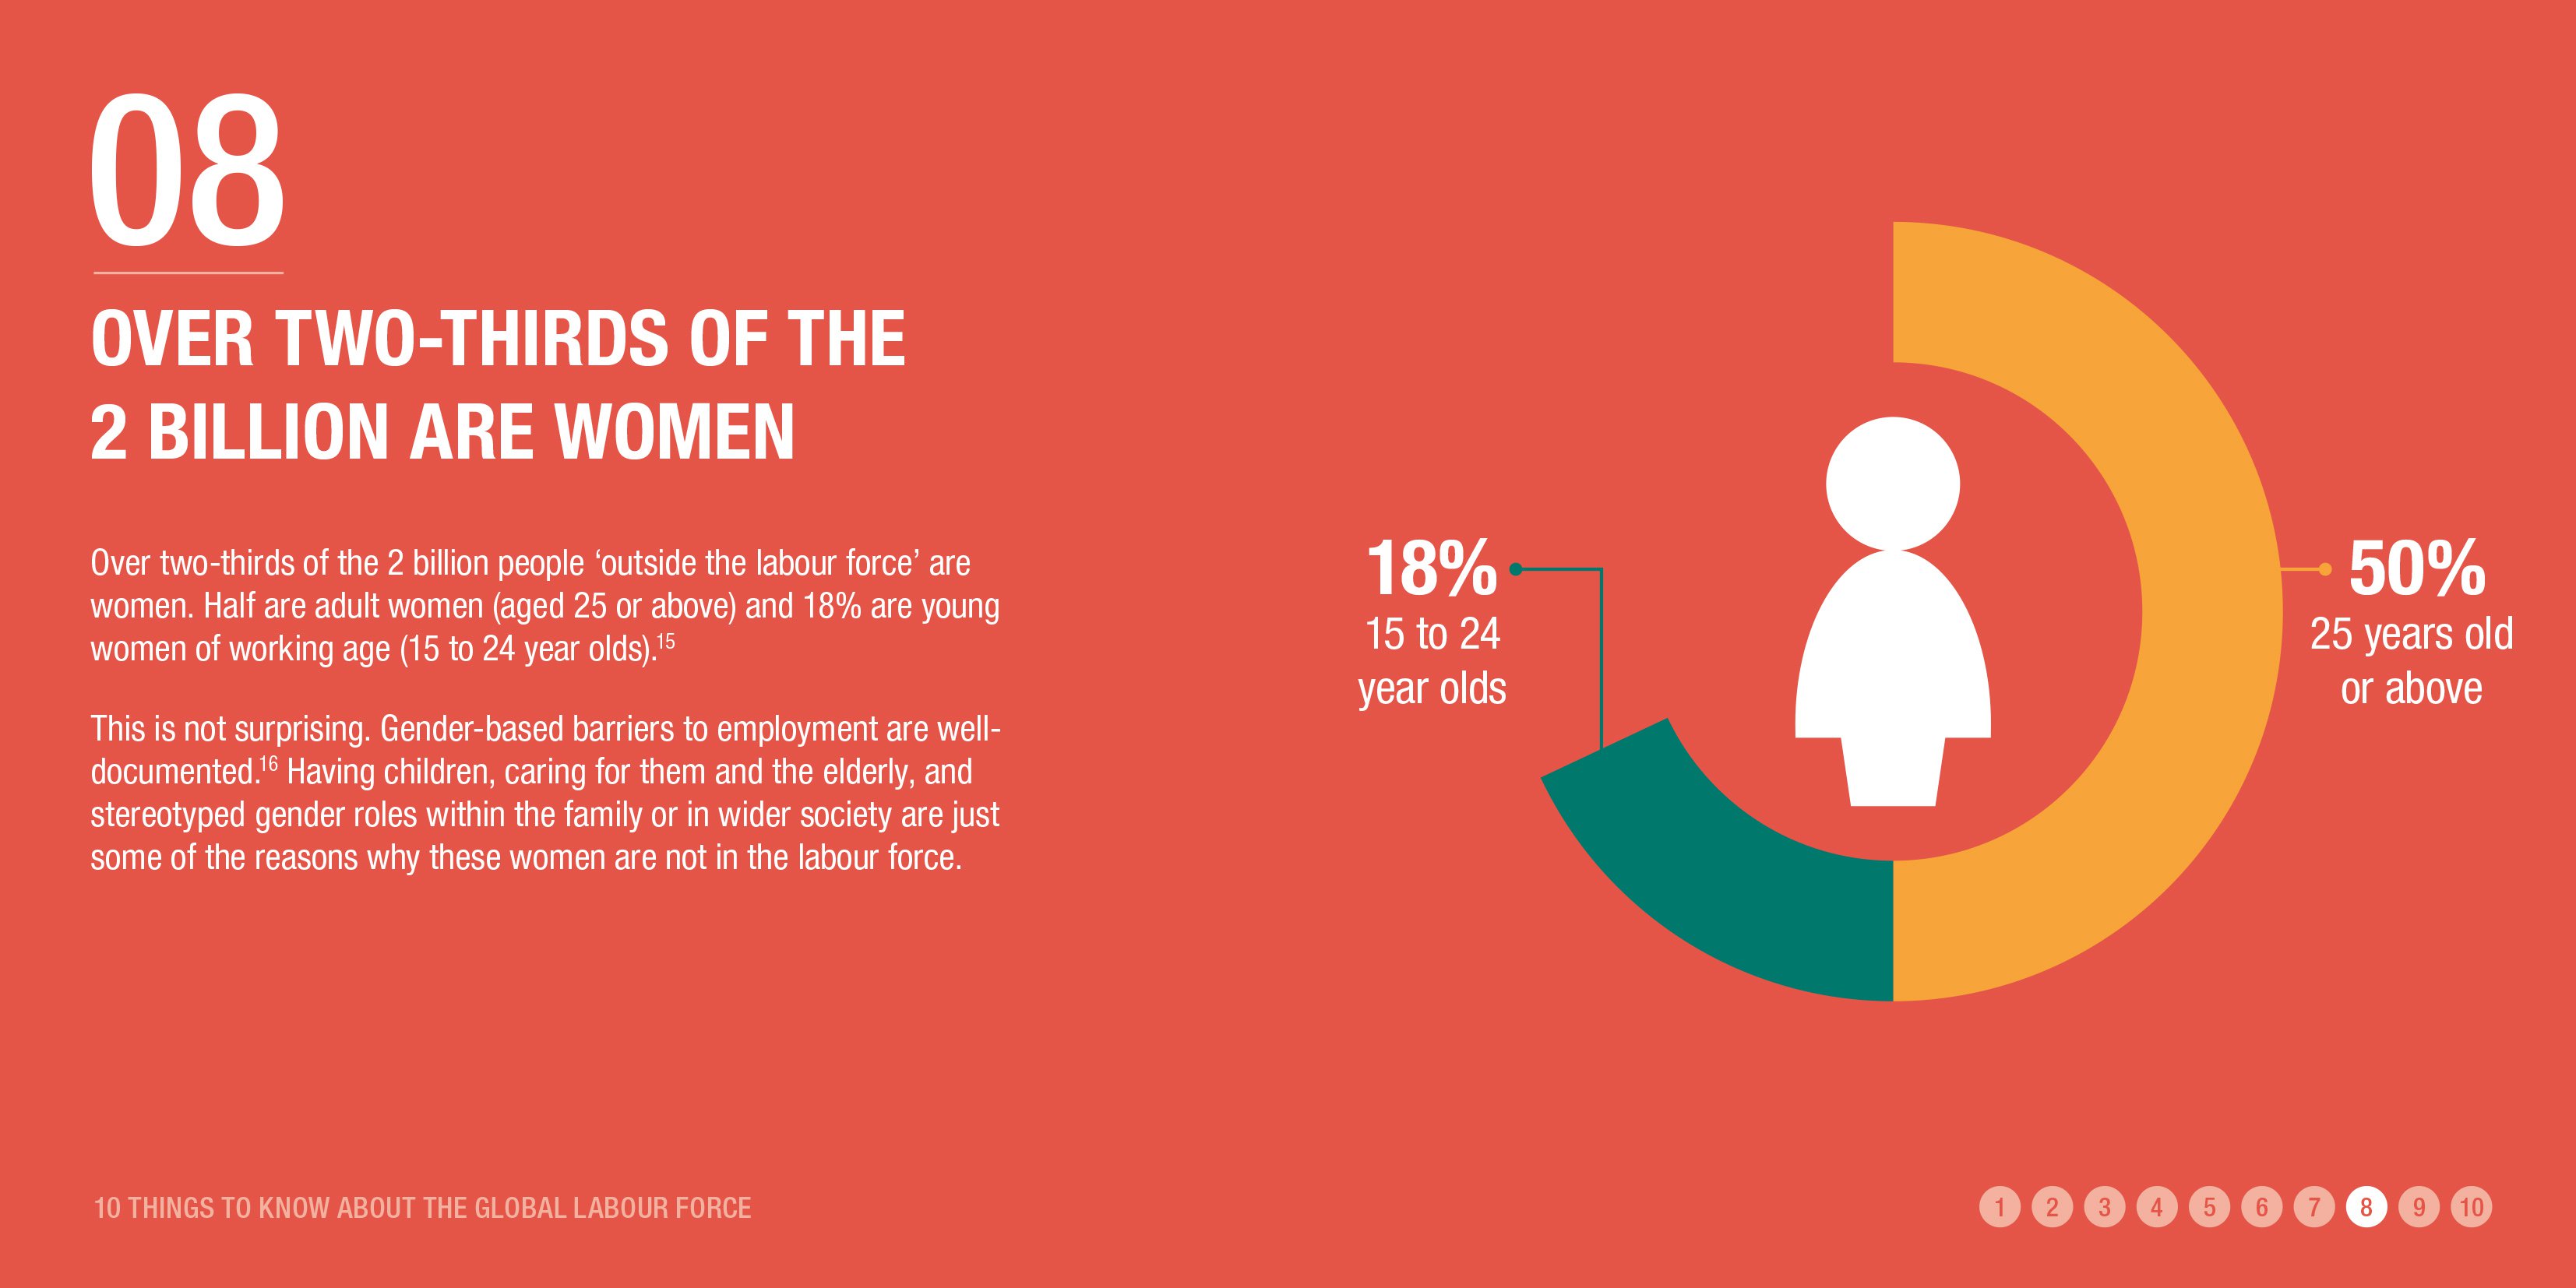 Over two-thirds of the 2 billion are women